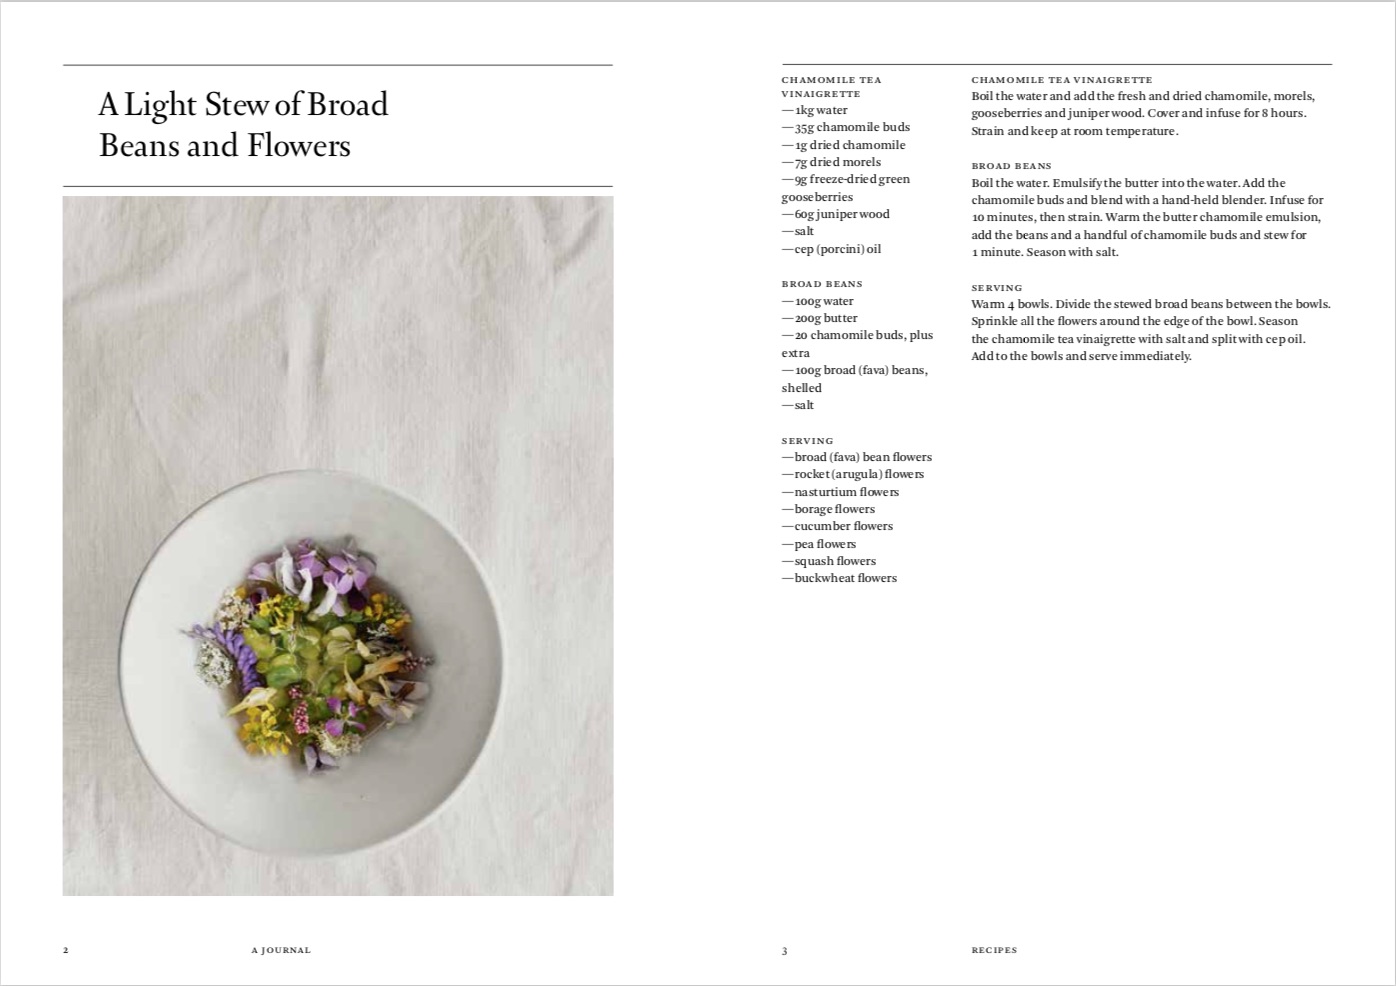 By Rene Redzepi from A Work in Progress: A Journal copyright Phaidon 2019